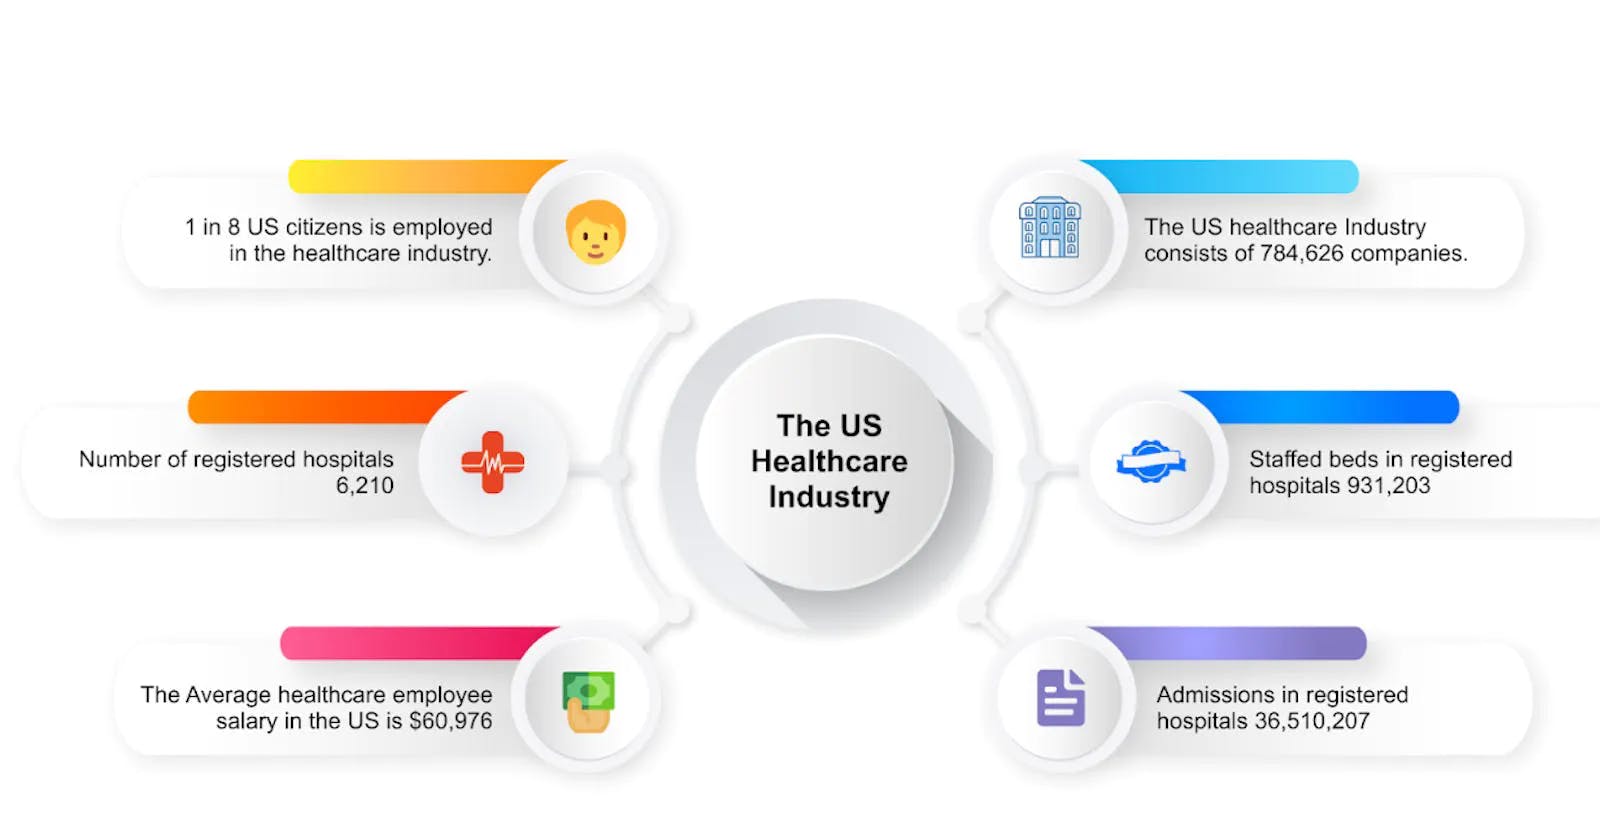 US Healthcare Industry: An Augmenting yet Declining Industry